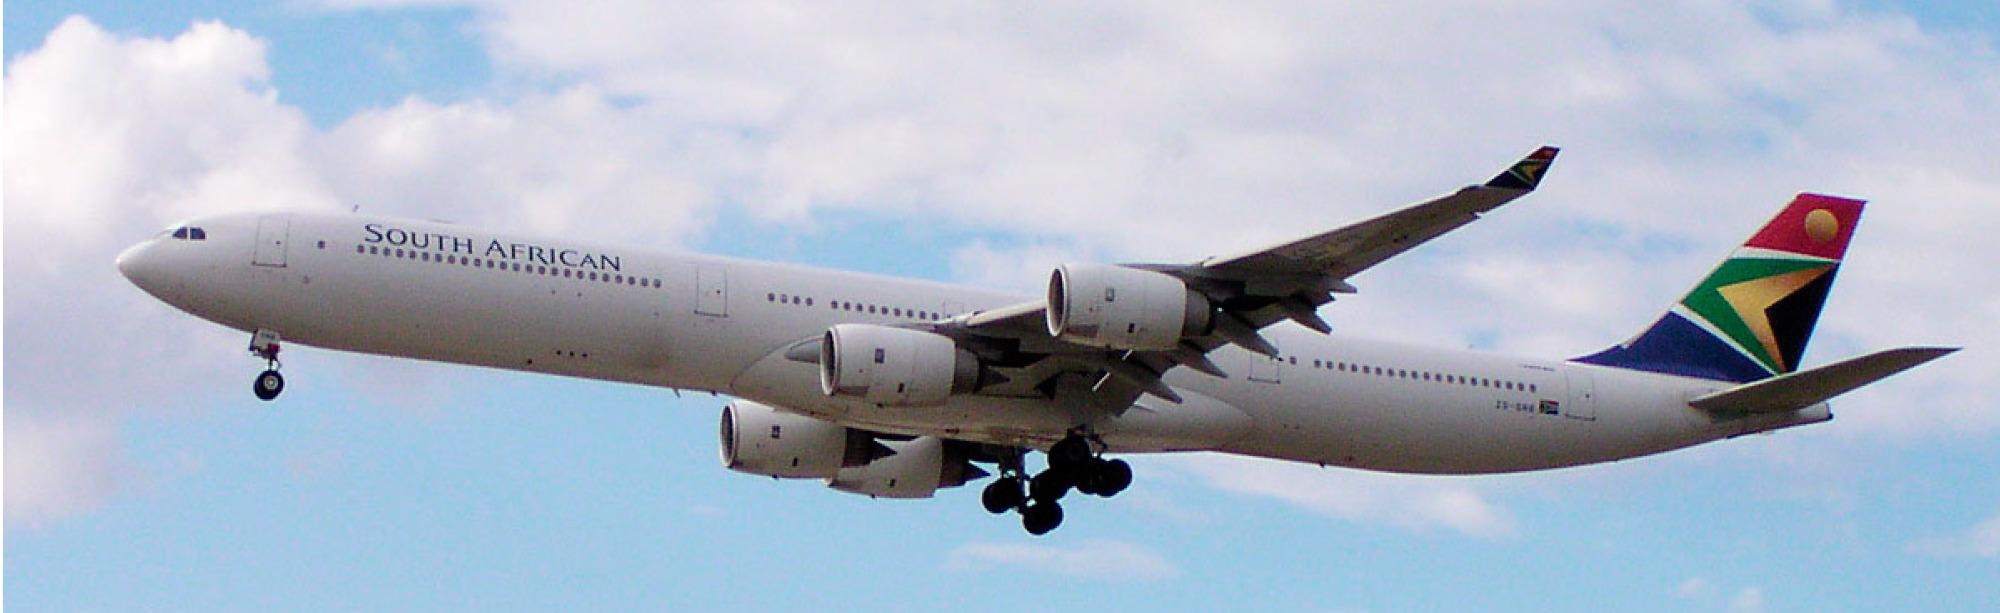 The Airbus A340 aircraft.